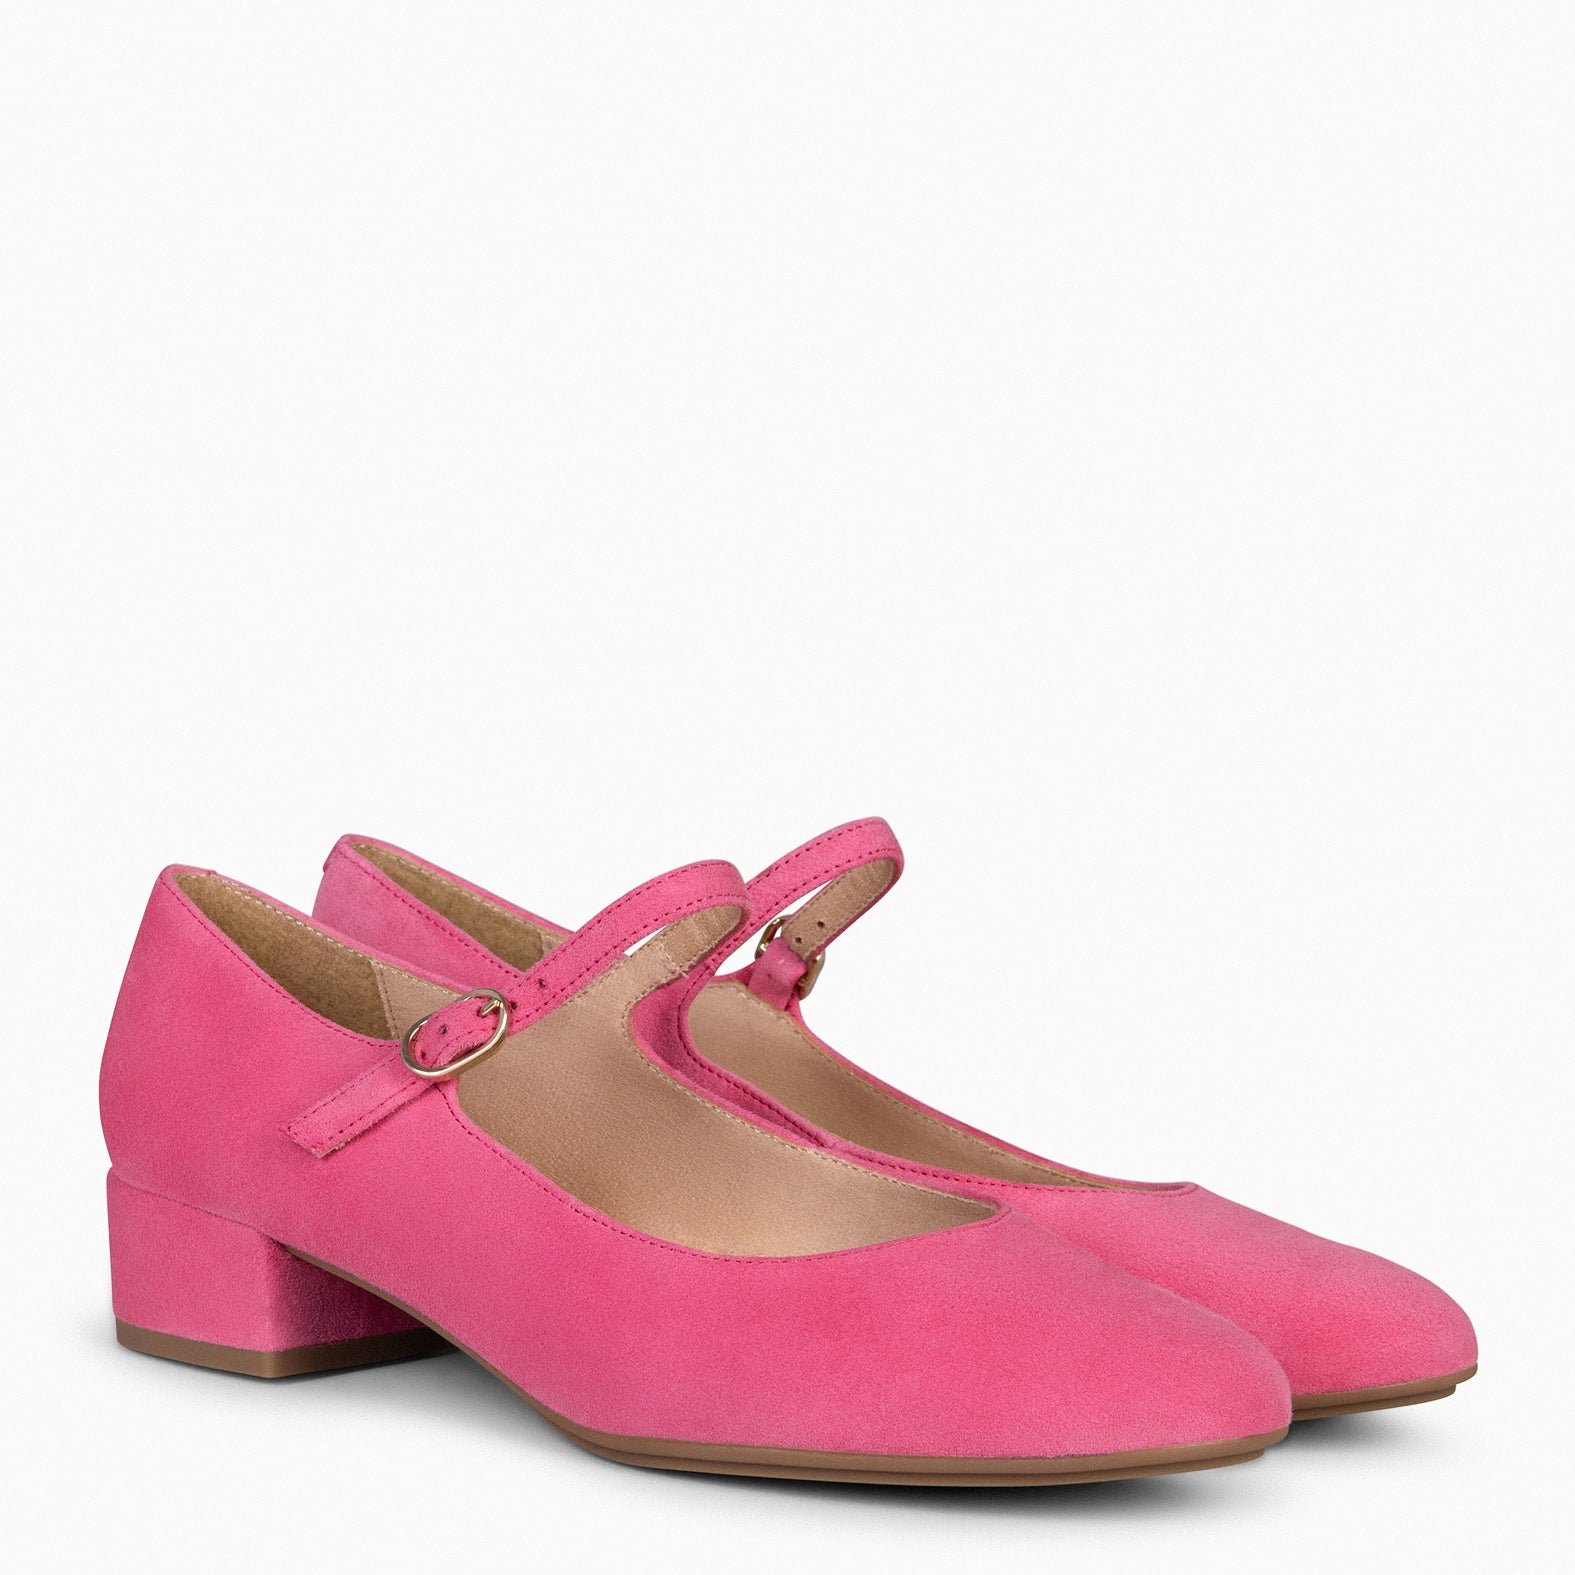 NORA – PINK Mary-Janes with low heel 